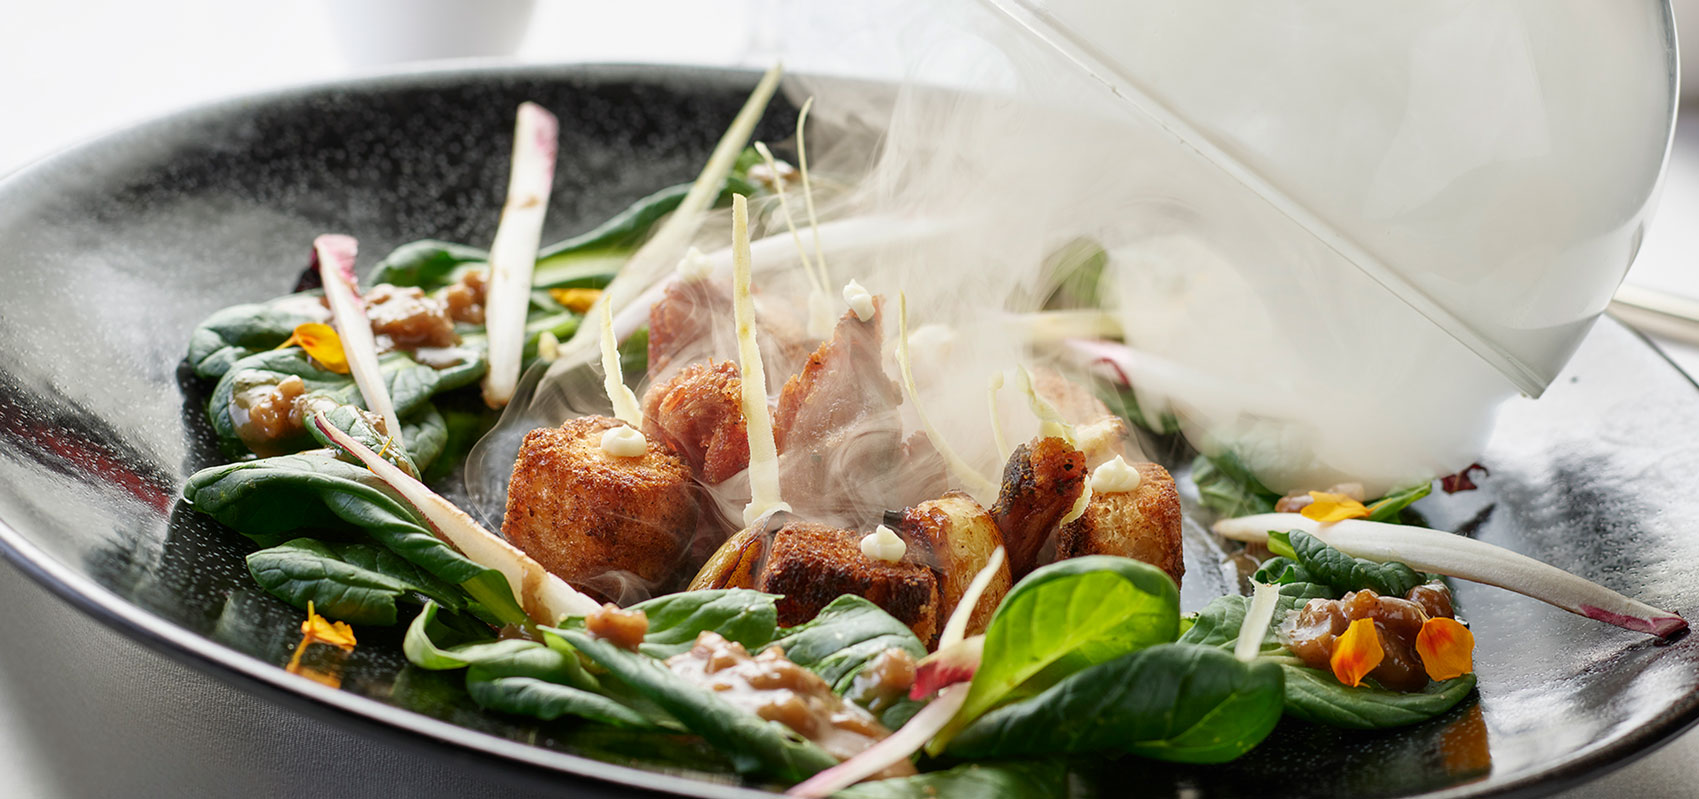 steaming fried food with greens